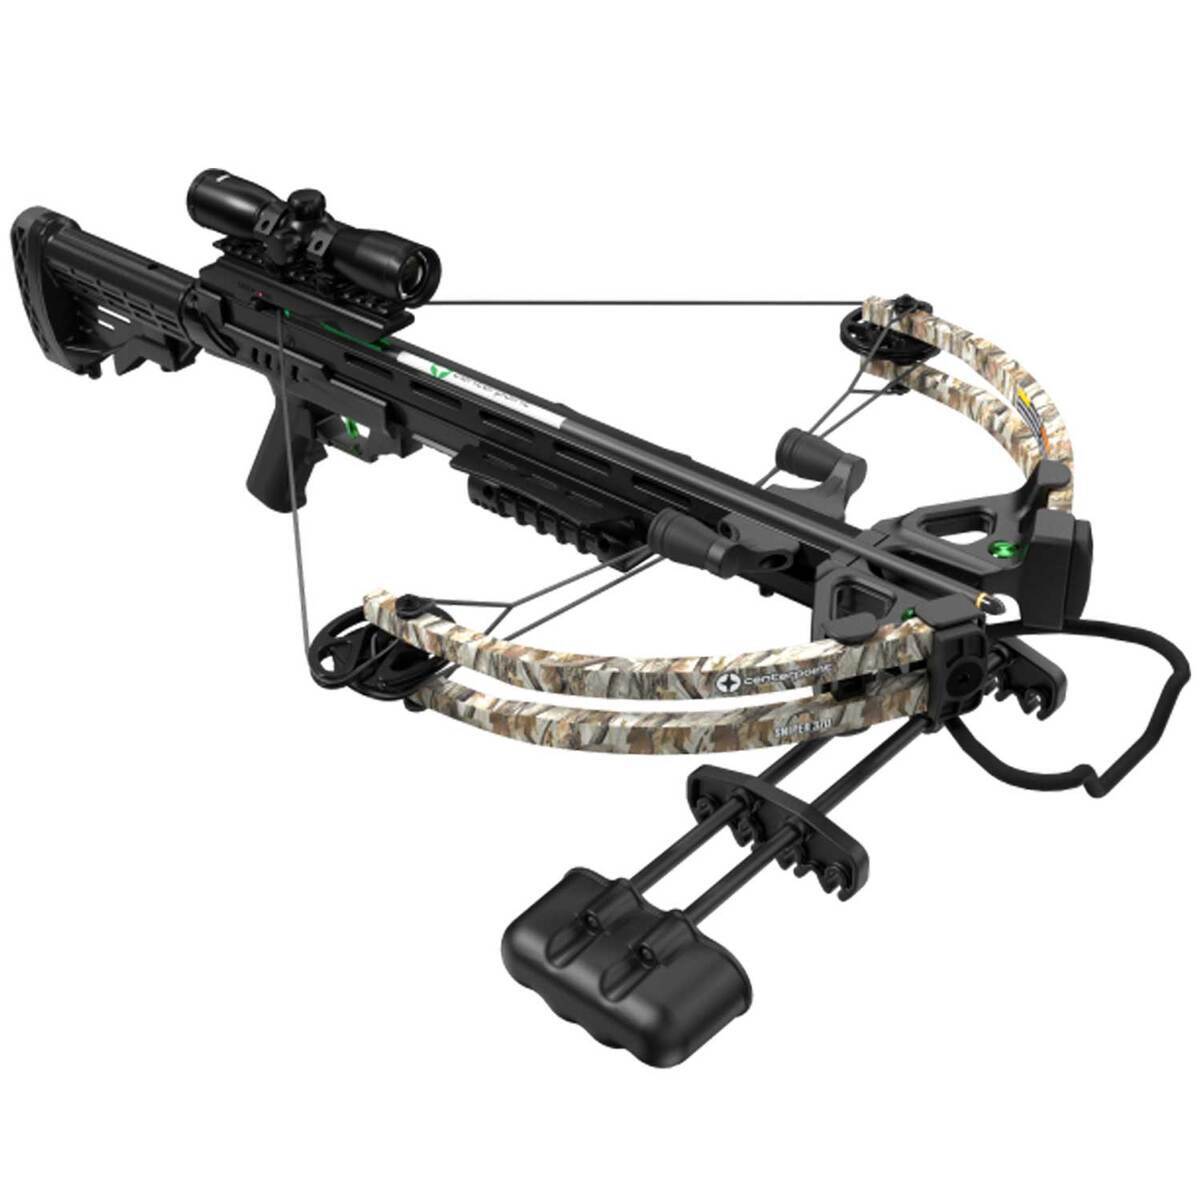 CenterPoint 425 Fps Crossbow CenterPoint Archery, 60% OFF